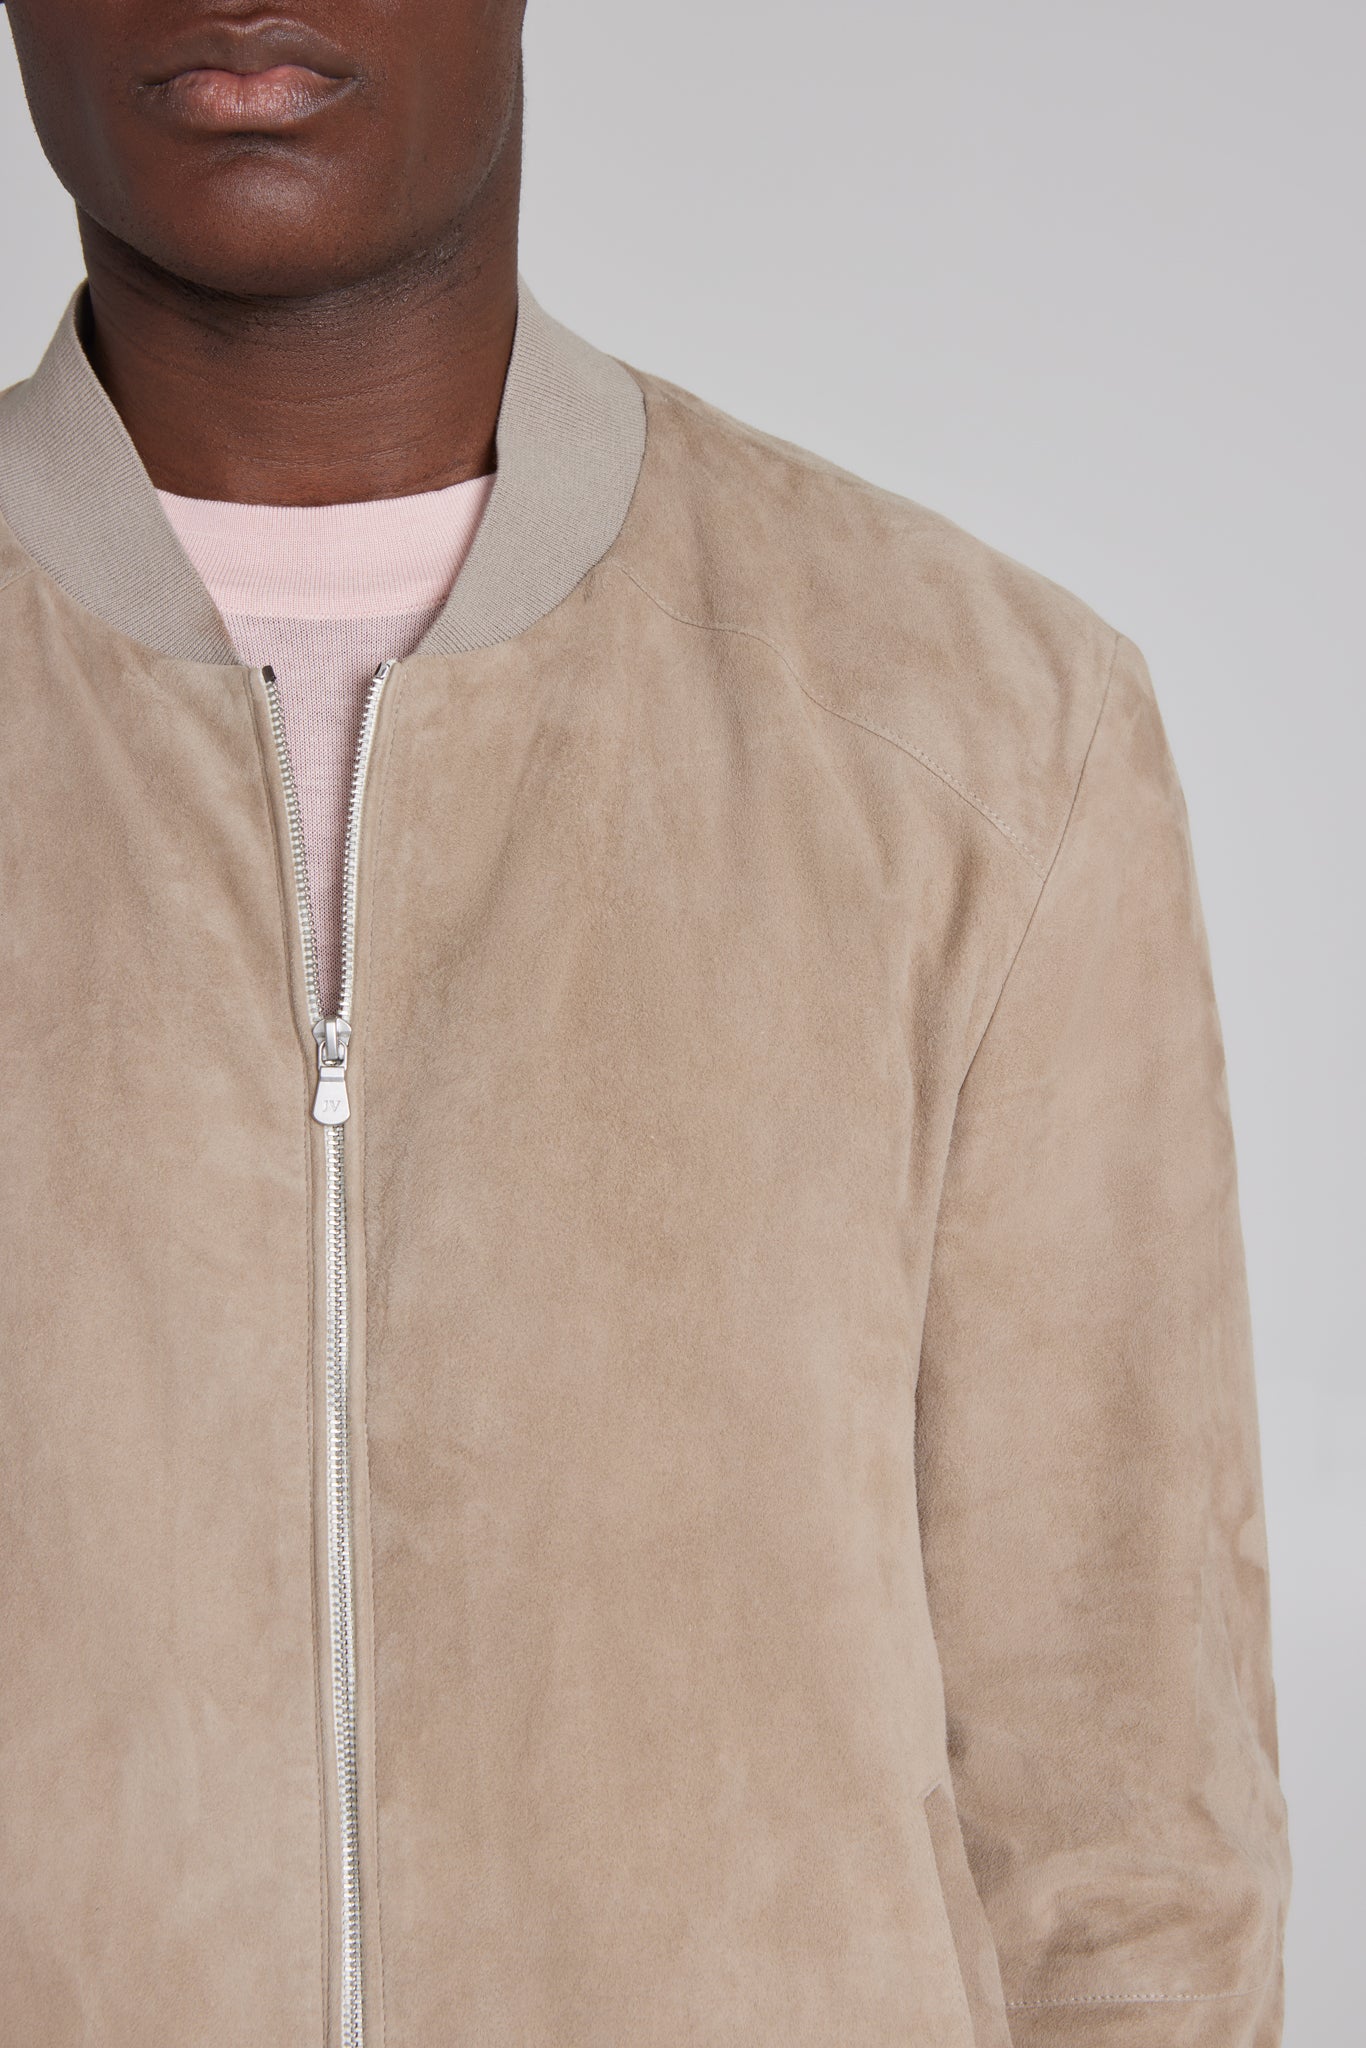 Alt view 1 Barclay Suede Bomber Jacket in Tan